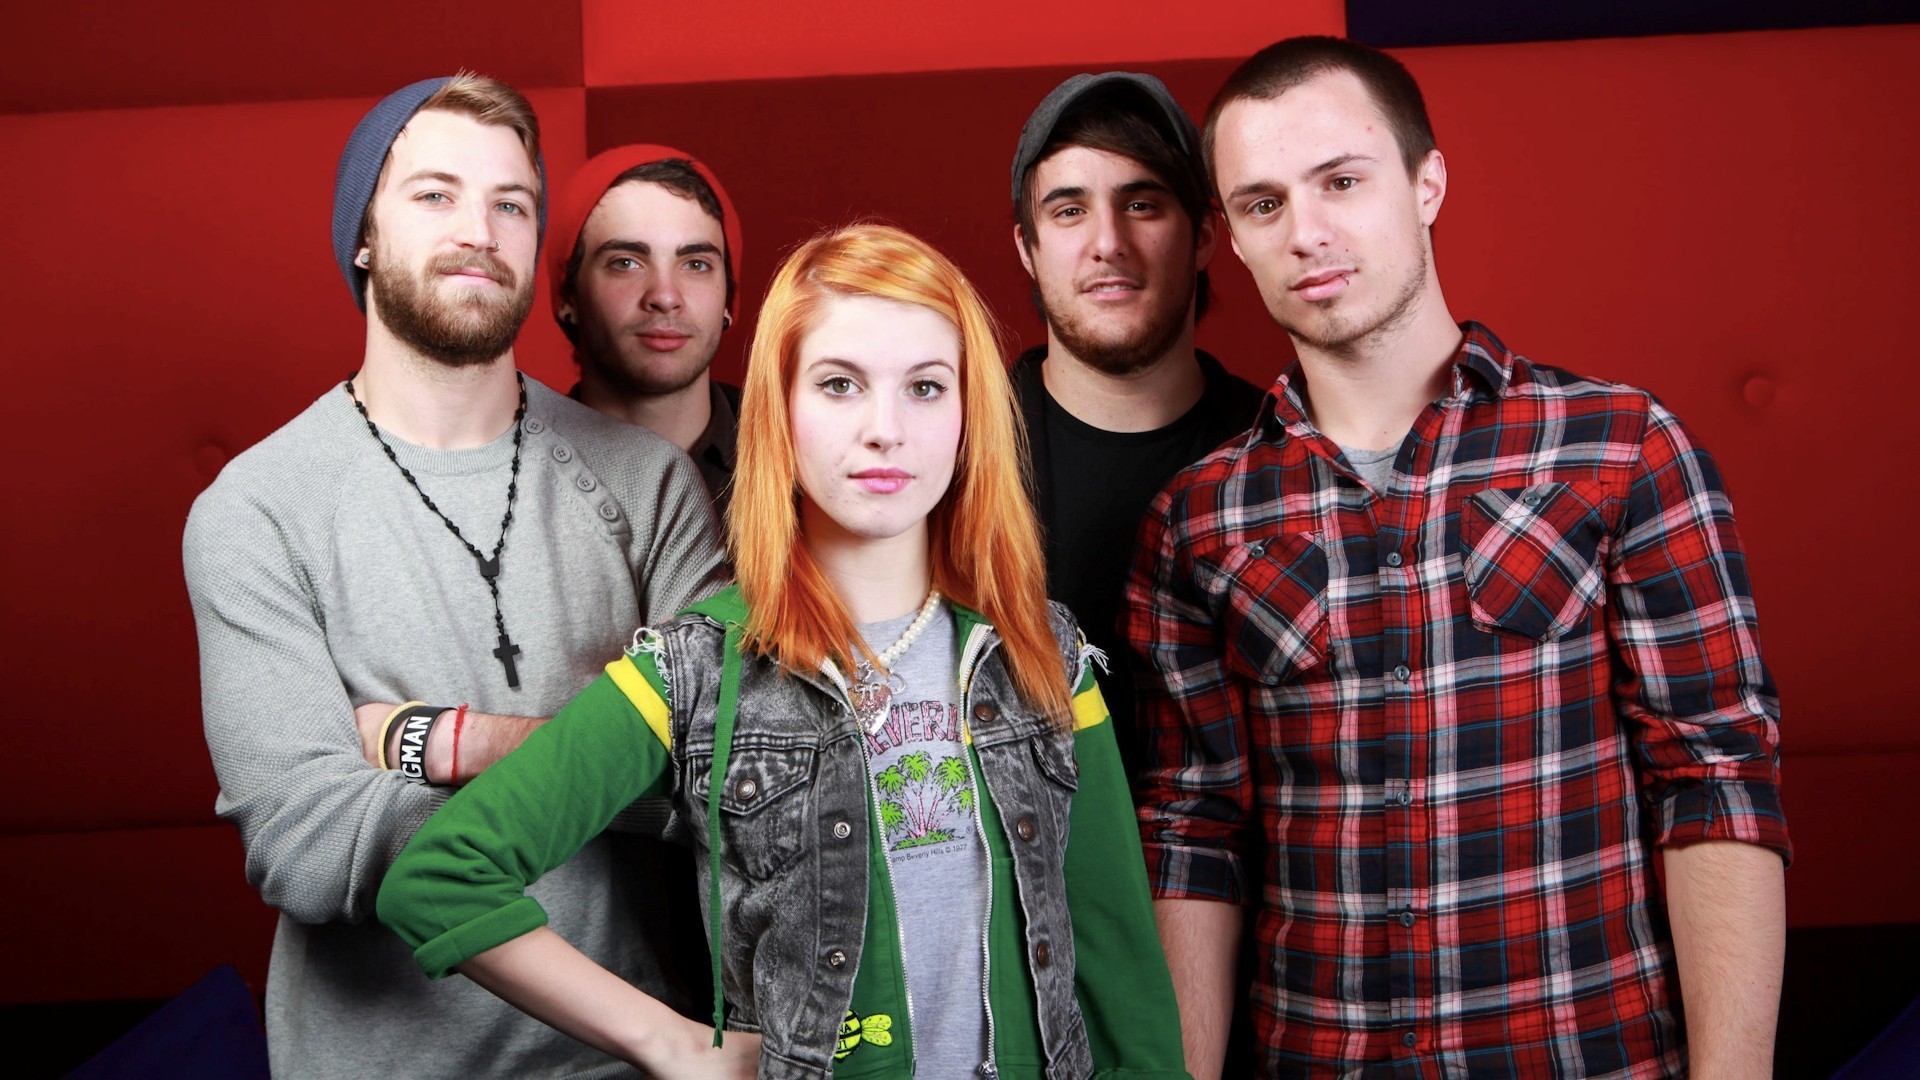 Music Paramore HD Wallpaper | Background Image